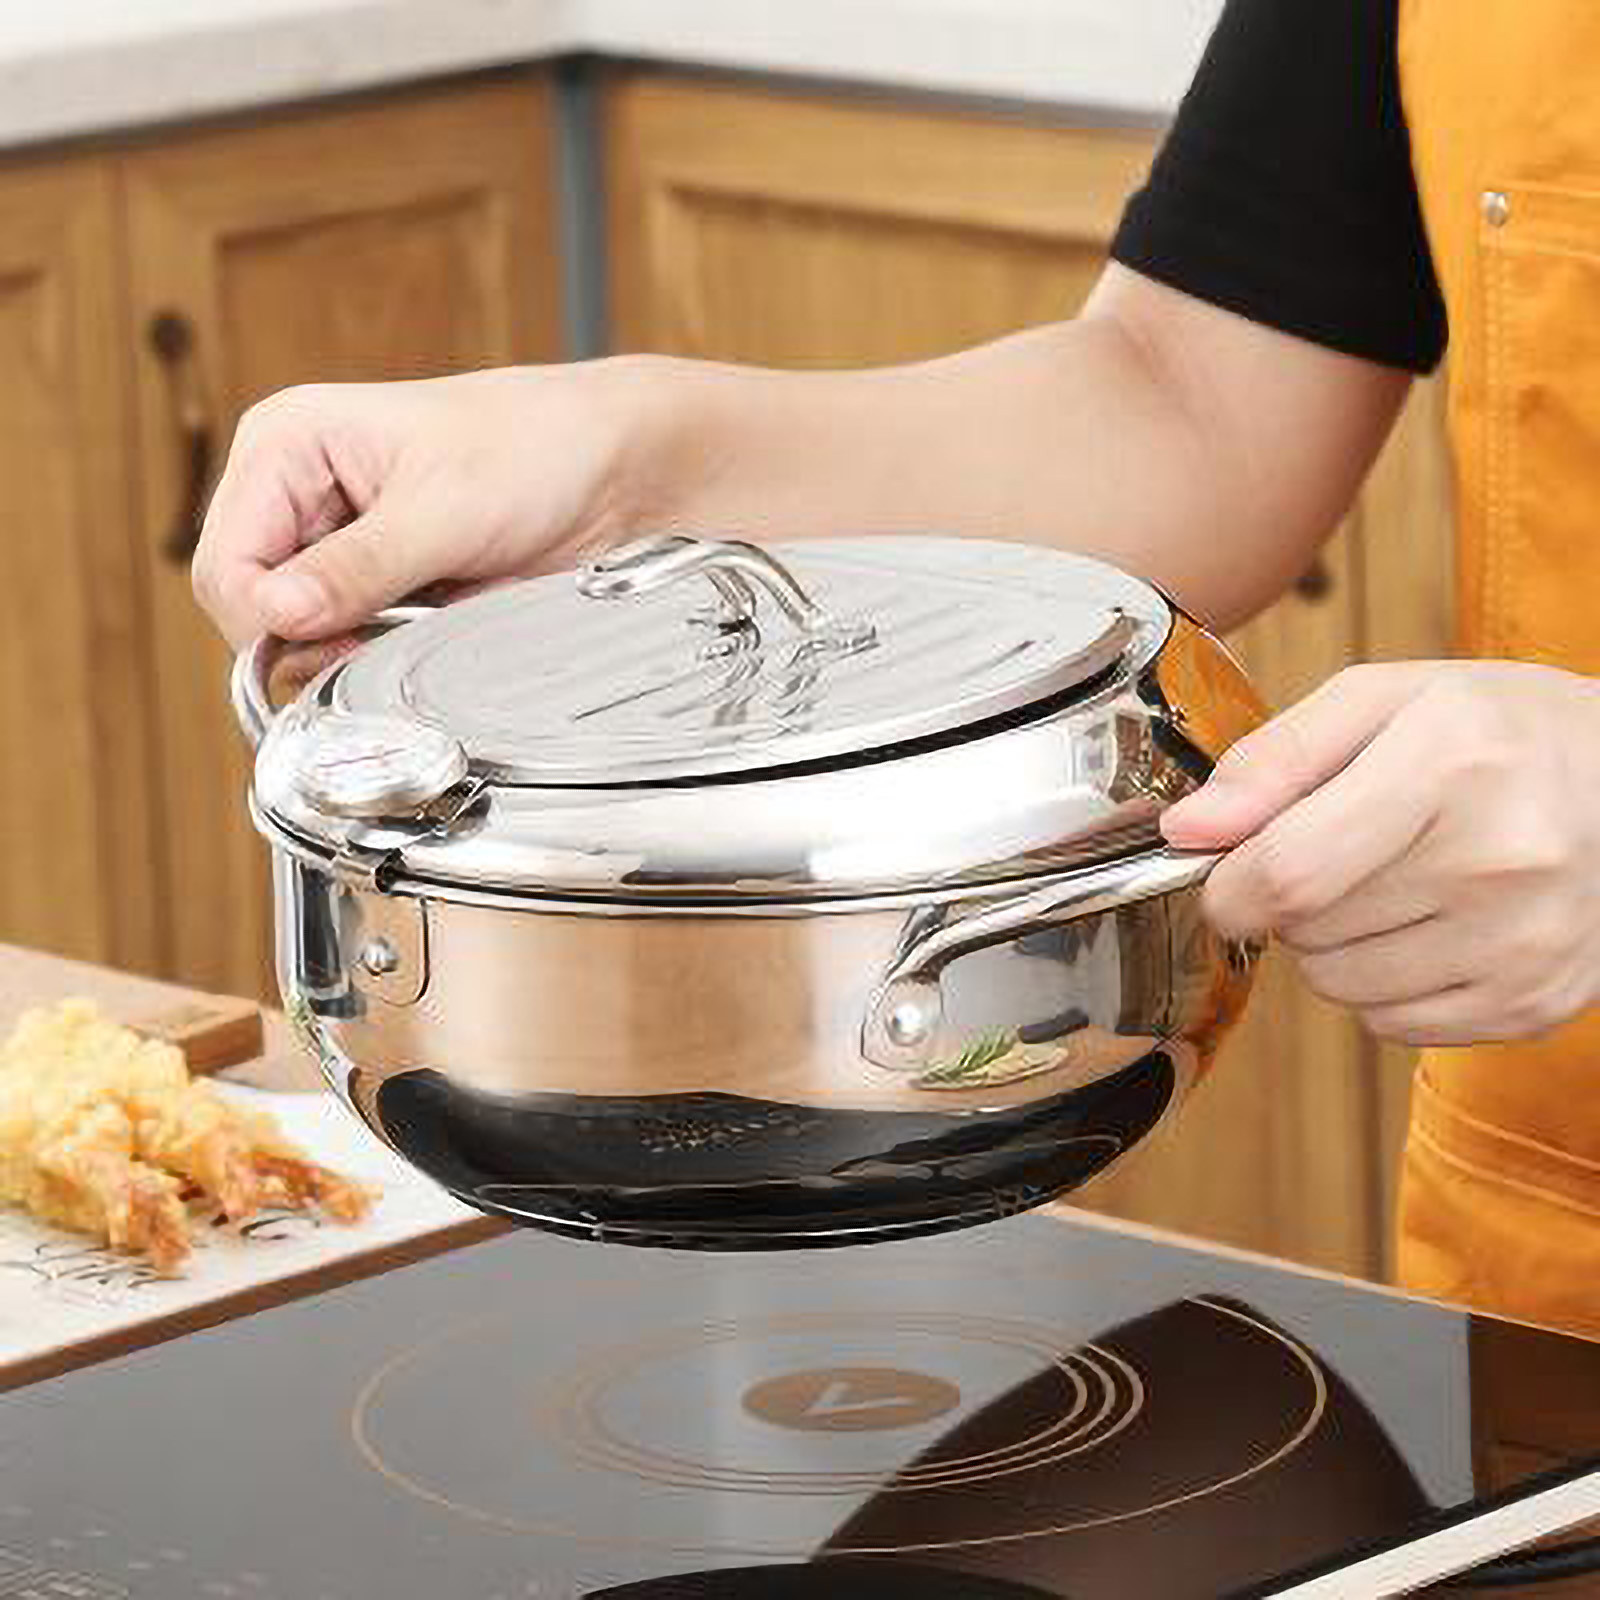 Kitchen Deep Frying Pot Thermometre Tempura Fryer Pan Temperature Control Fried Chicken Pot Cooking Tools Stainless Steel #T3G